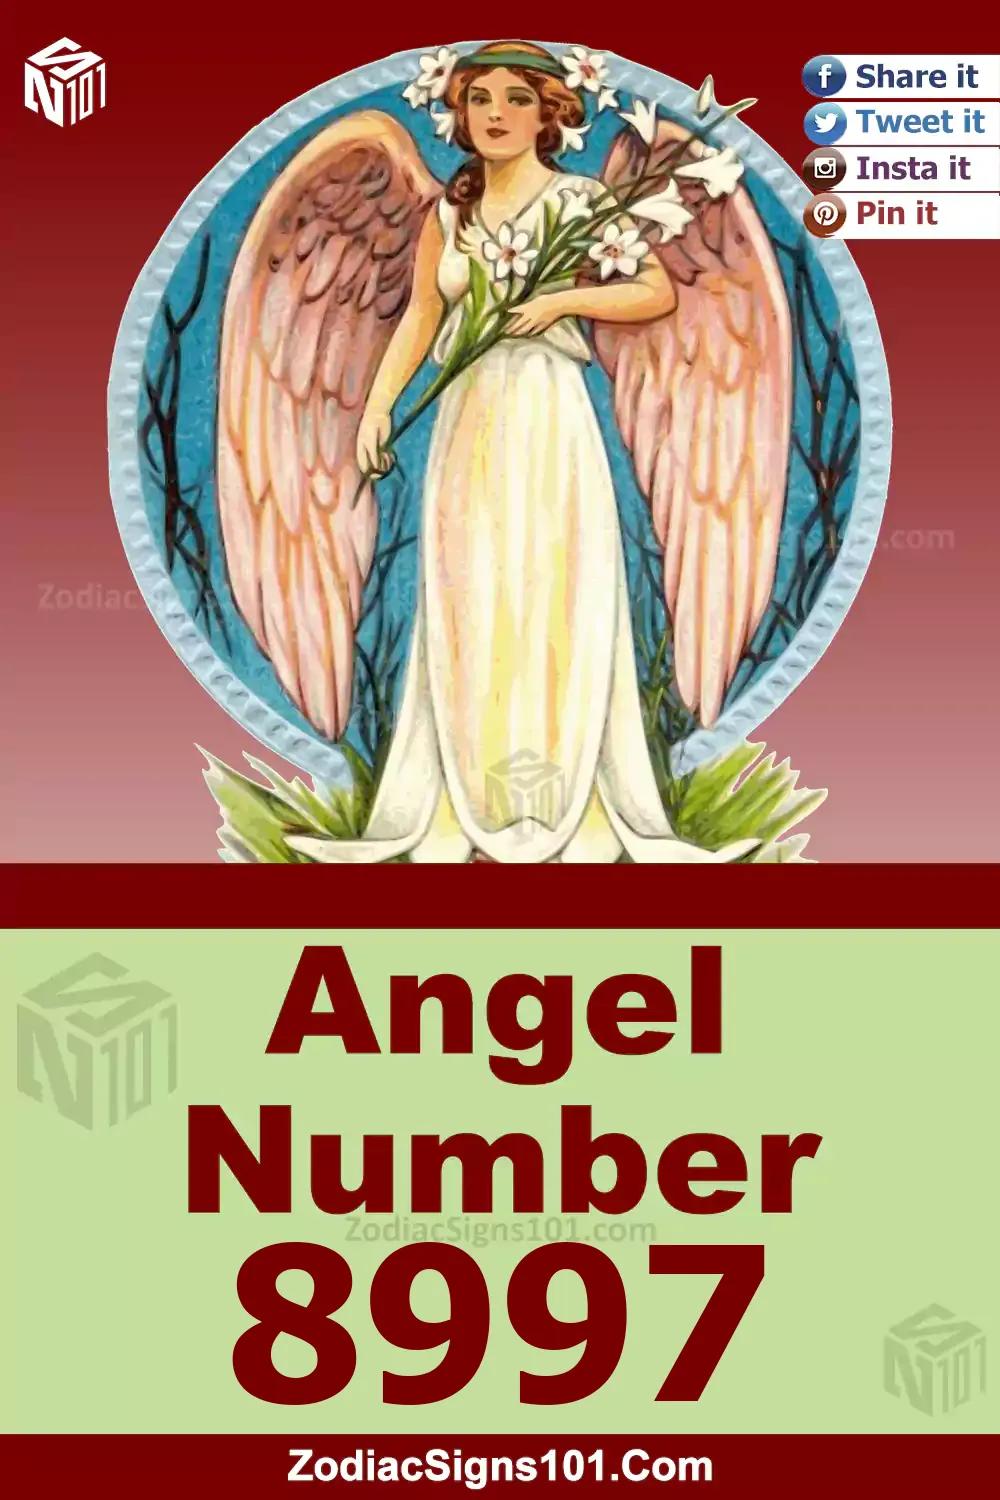 8997 Angel Number Meaning